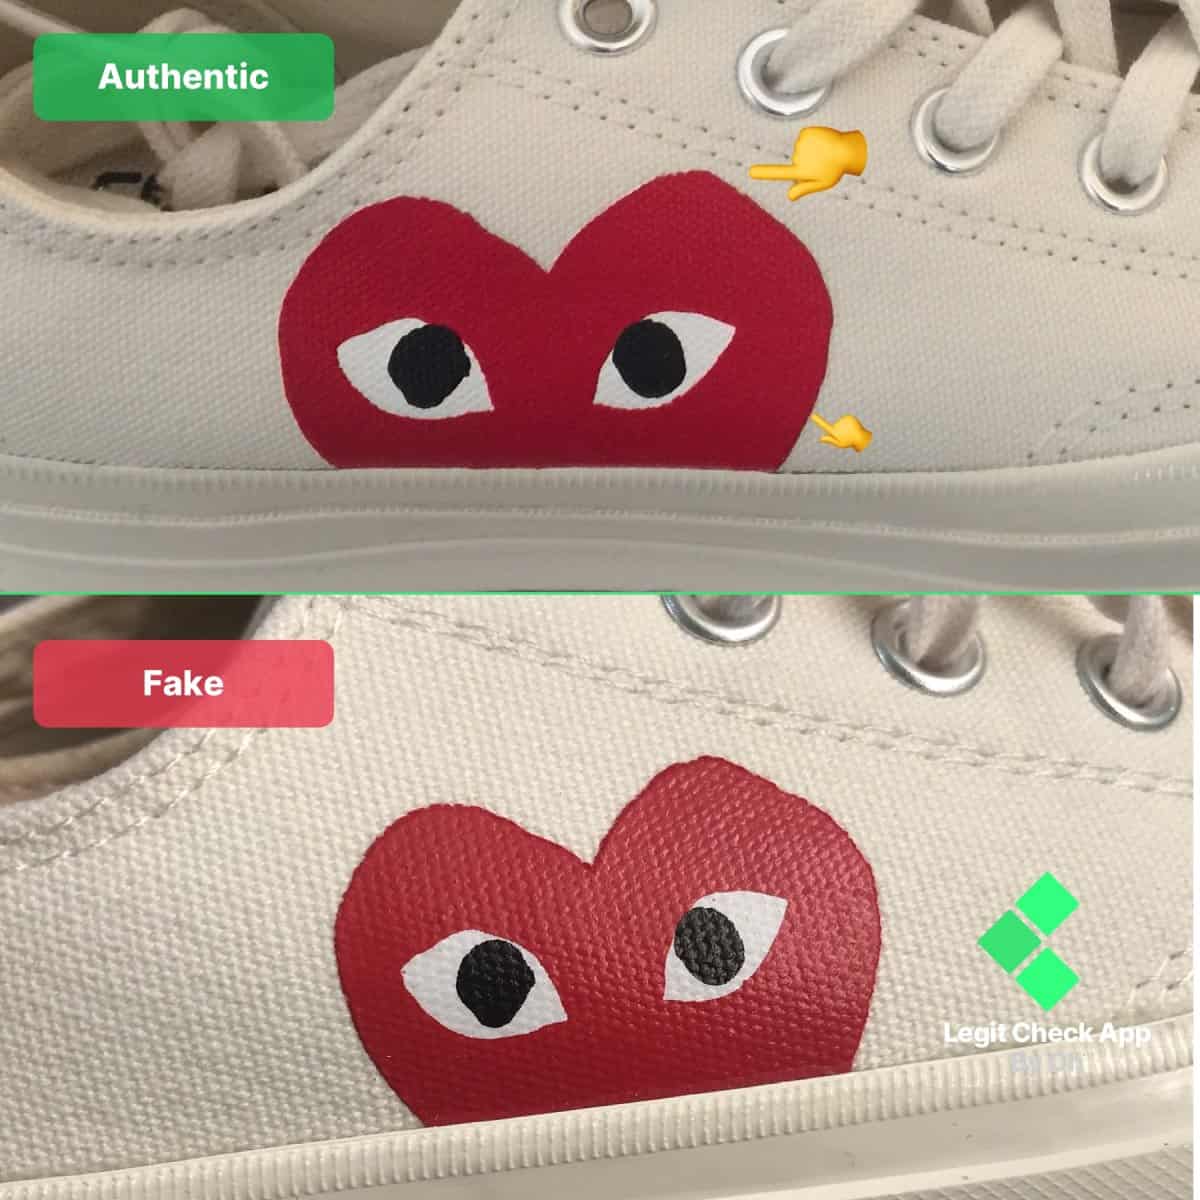 converse shoes with red eyes